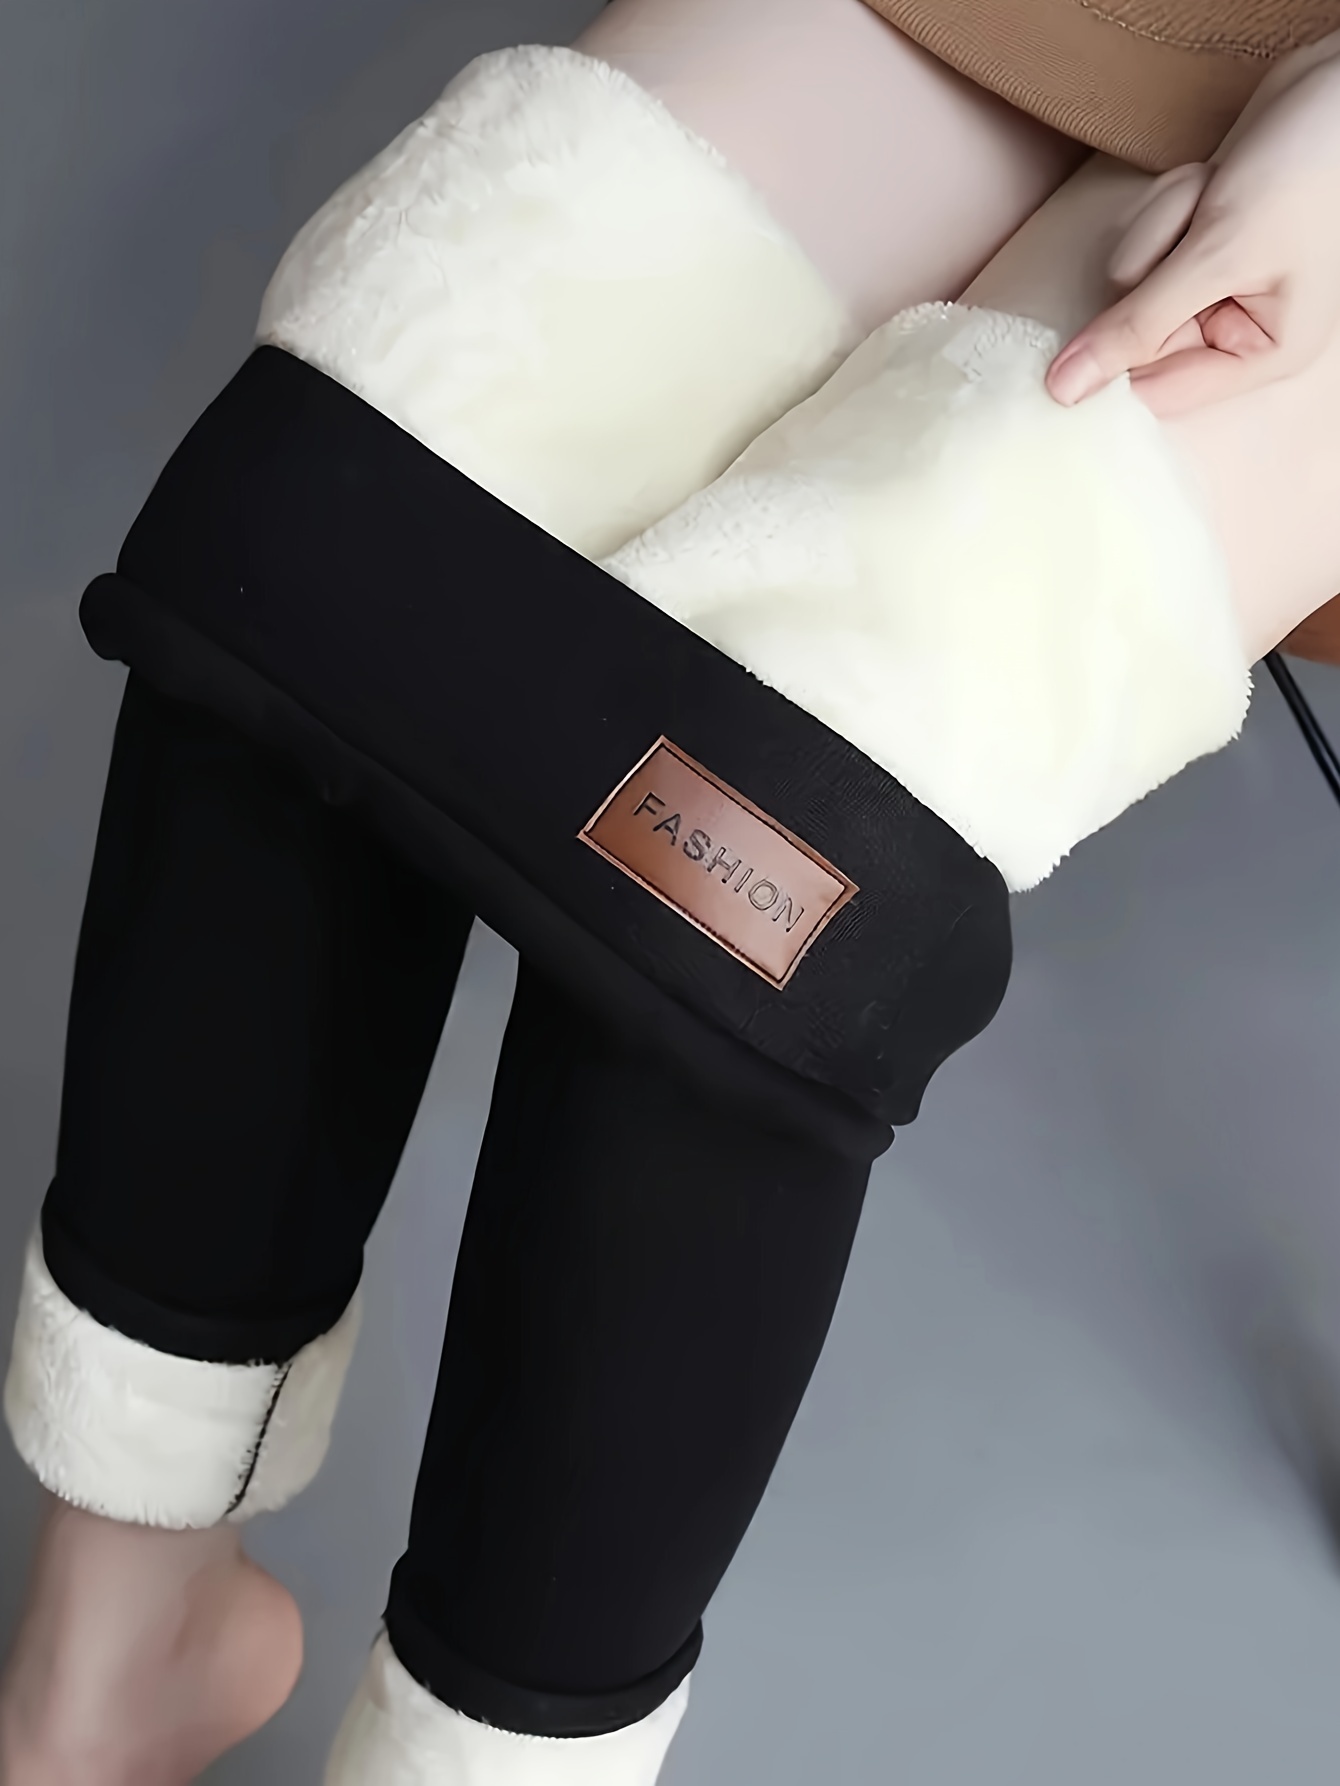  NORMOV Fleece Lined Leggings with Pockets for Women